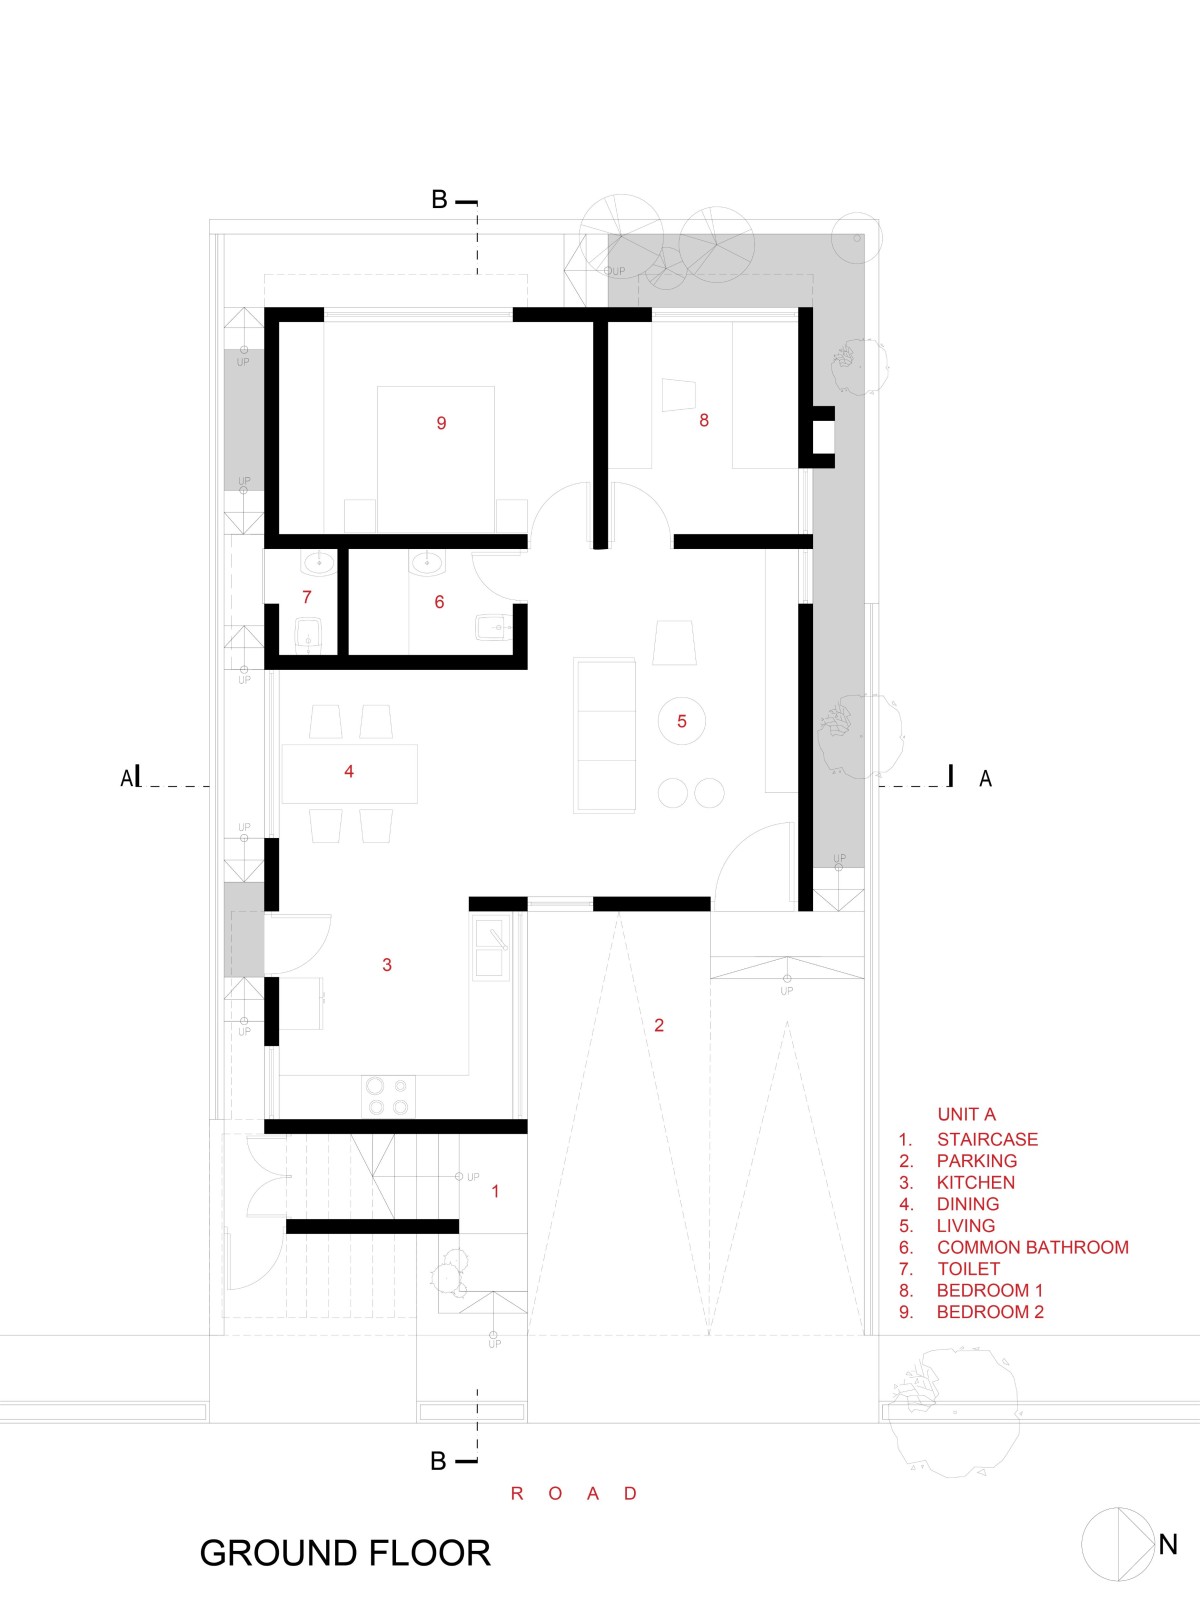 Ground floor plan of Lucid House by ma+rs